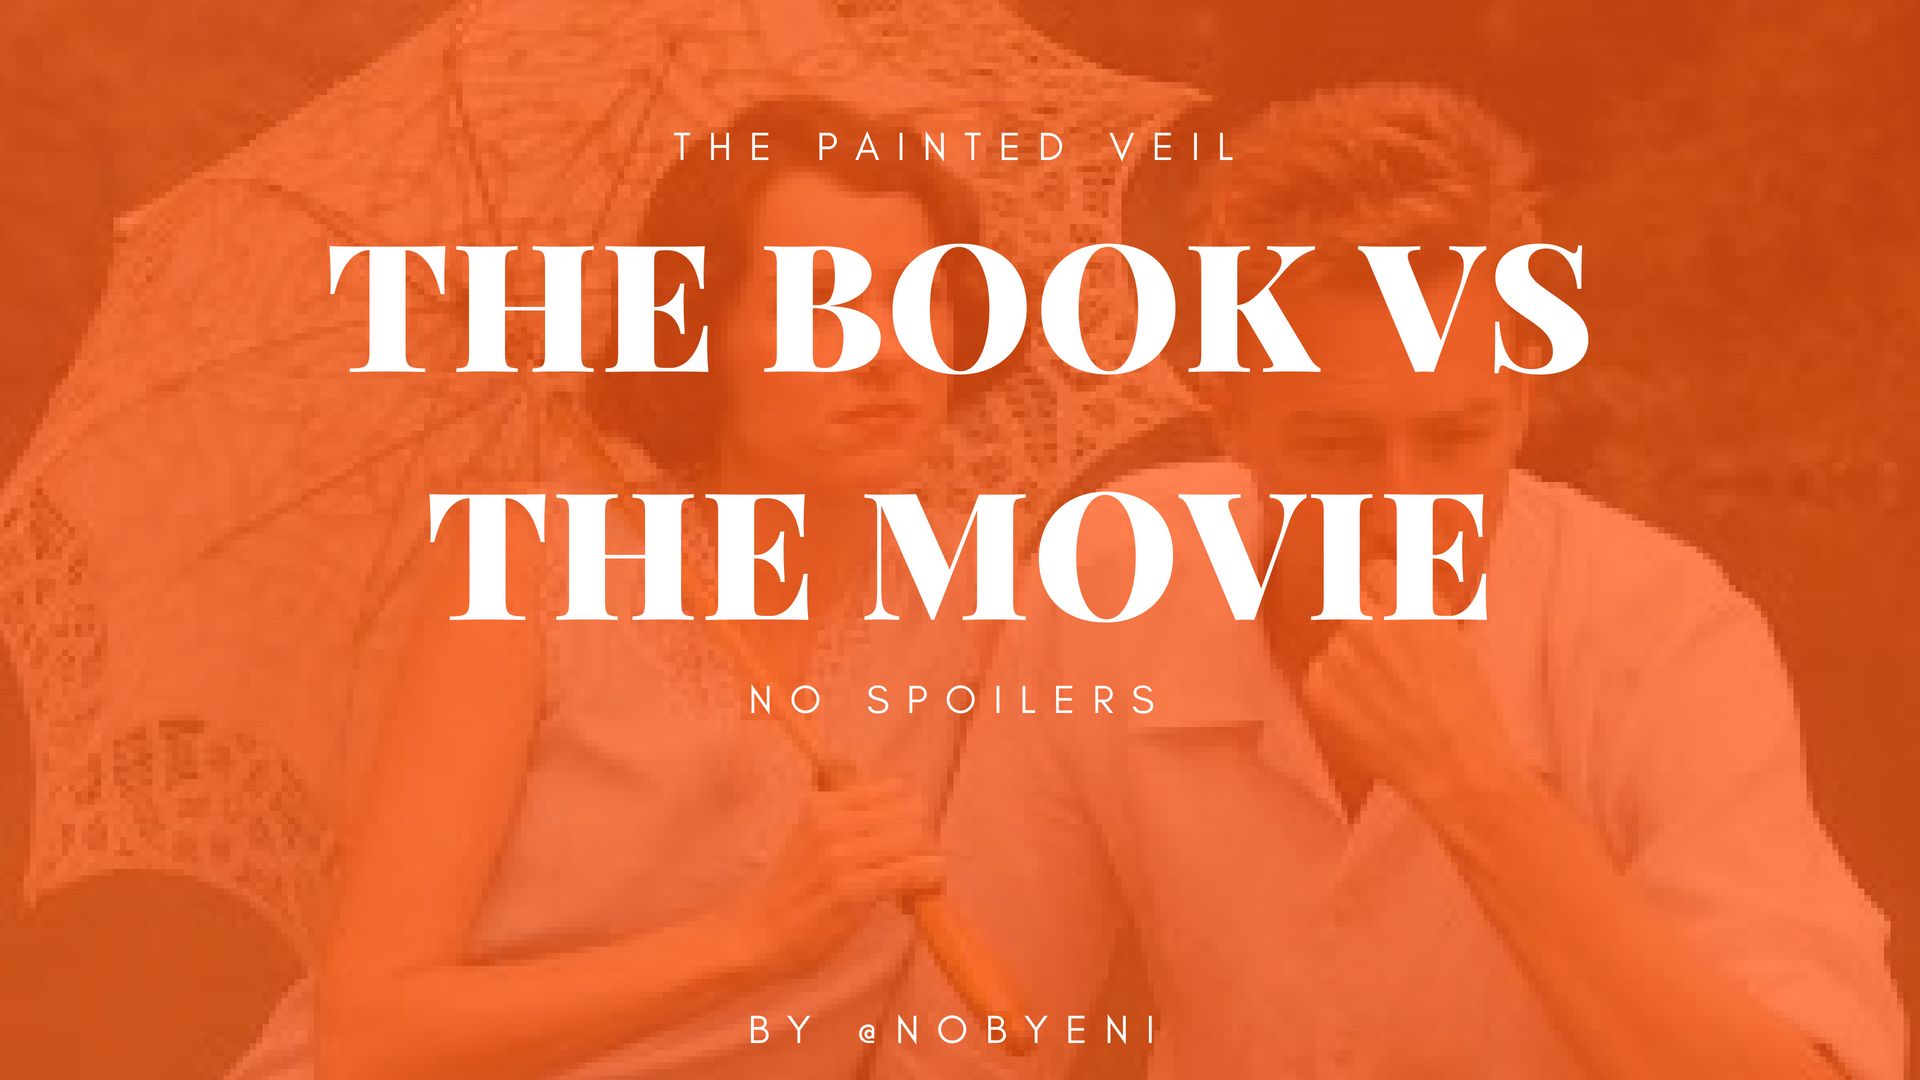 Is the Book Better Than the Movie?